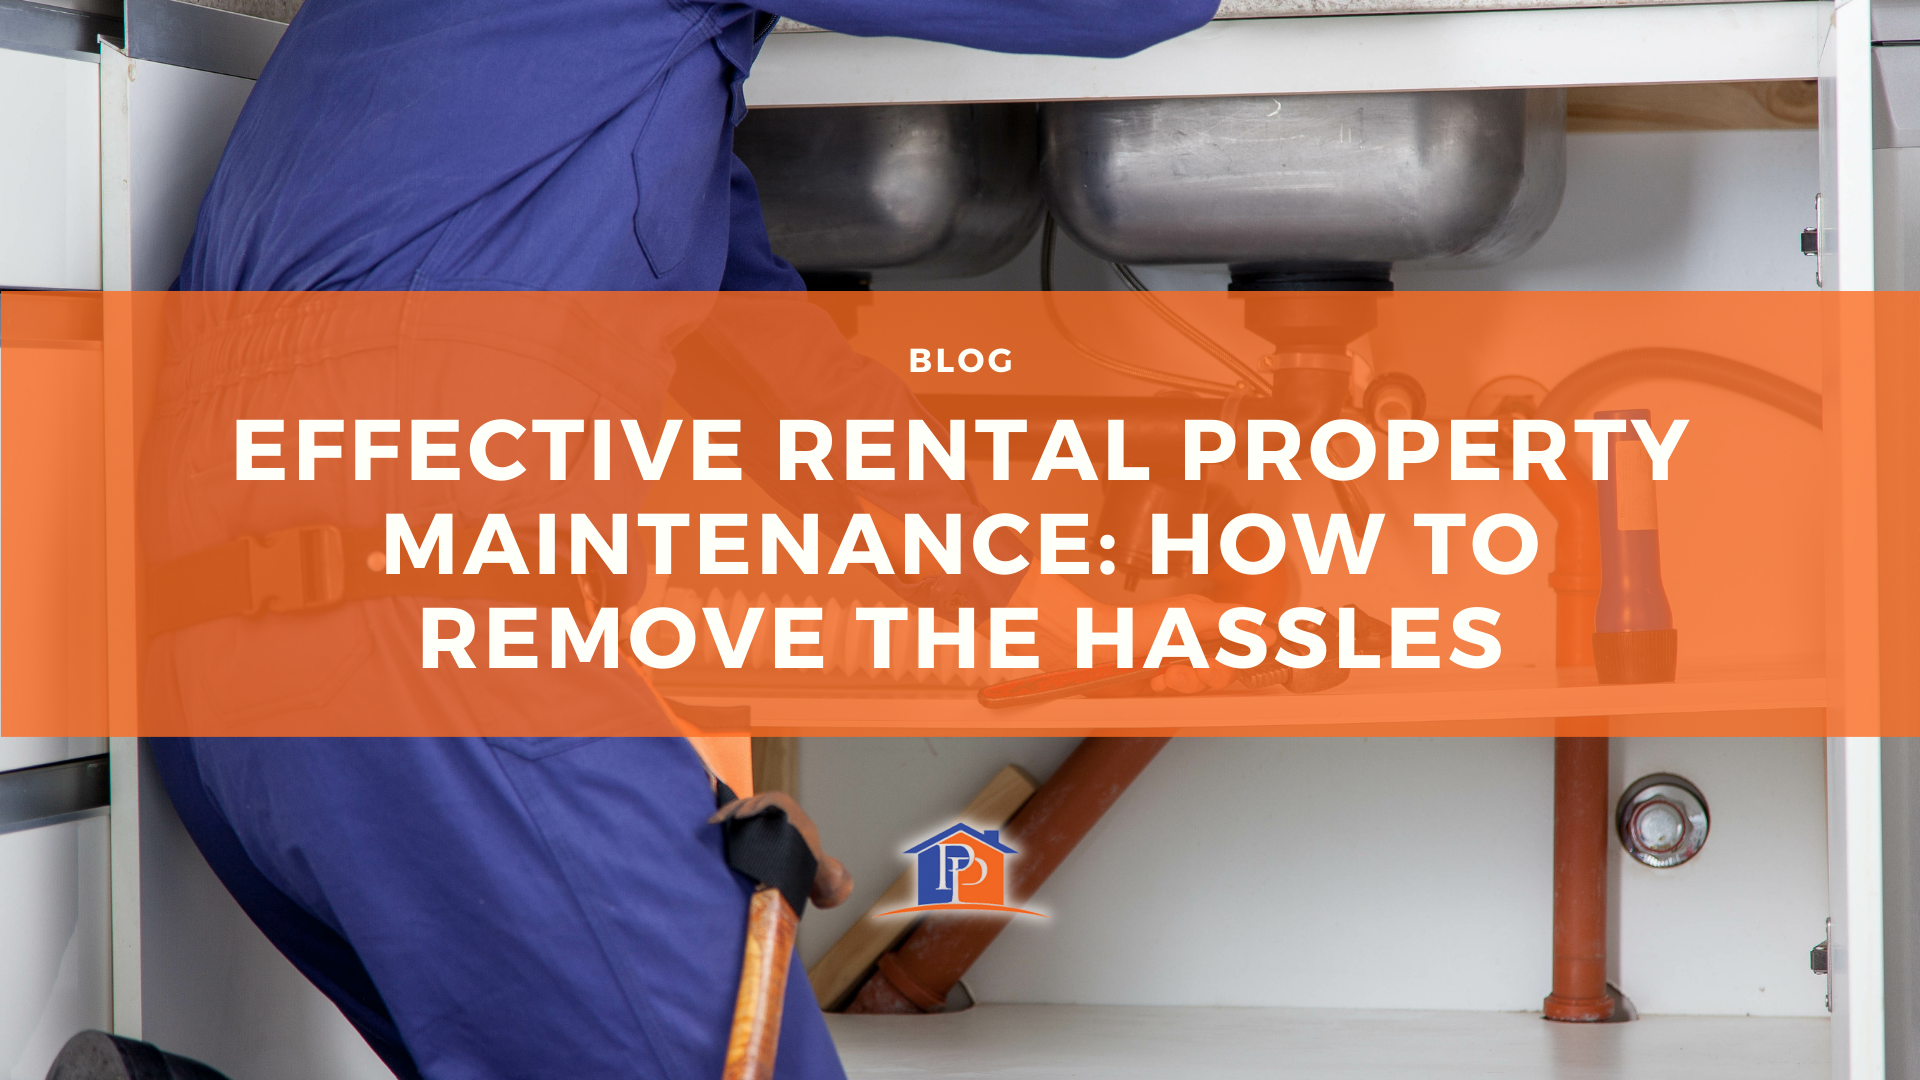 Effective Rental Property Maintenance: How to Remove the Hassles